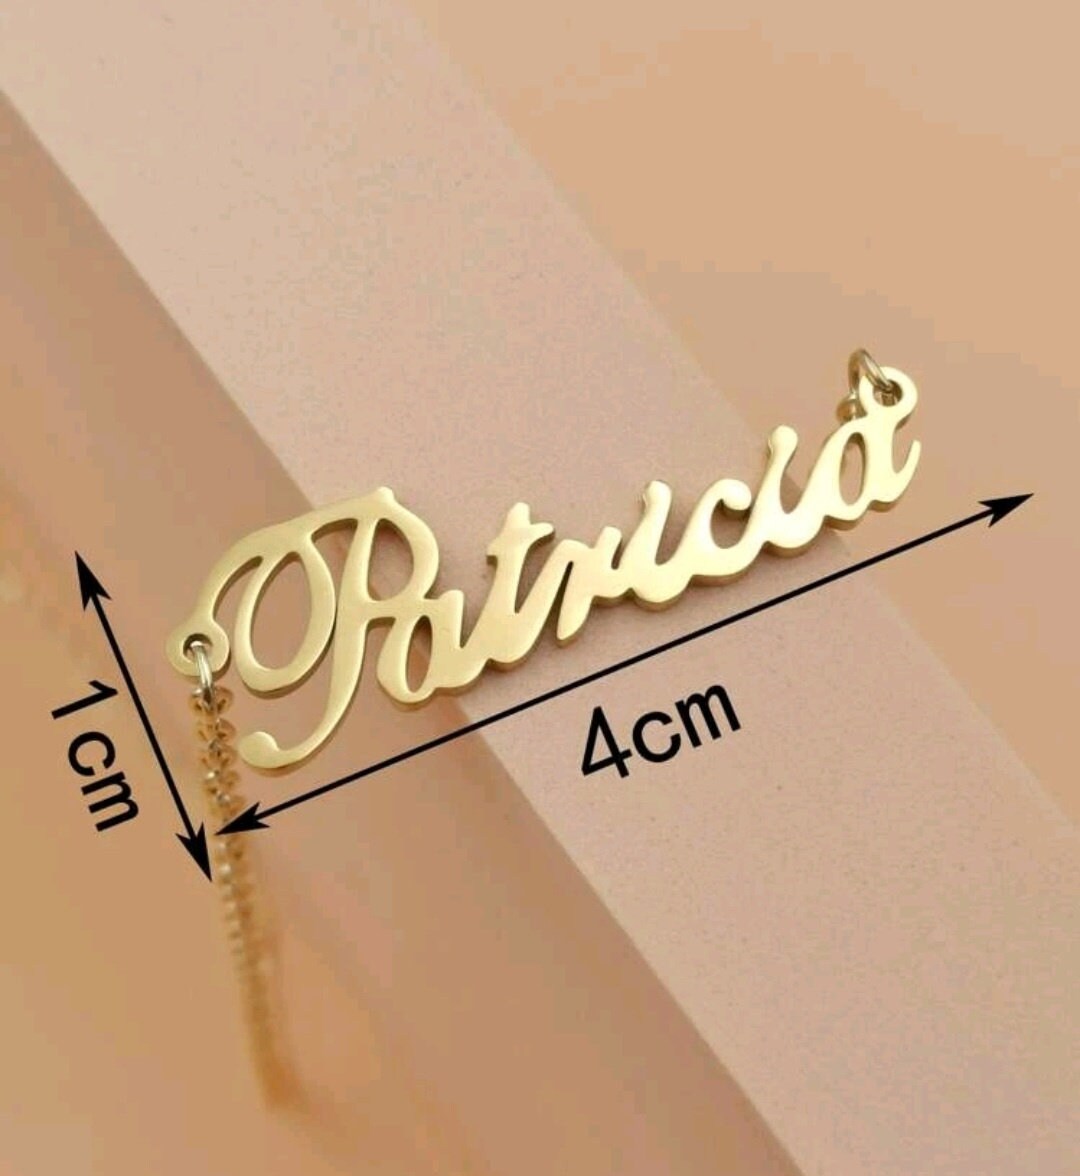 Dainty Name necklace Patricia gold Stainless steel pendant necklace gift for her